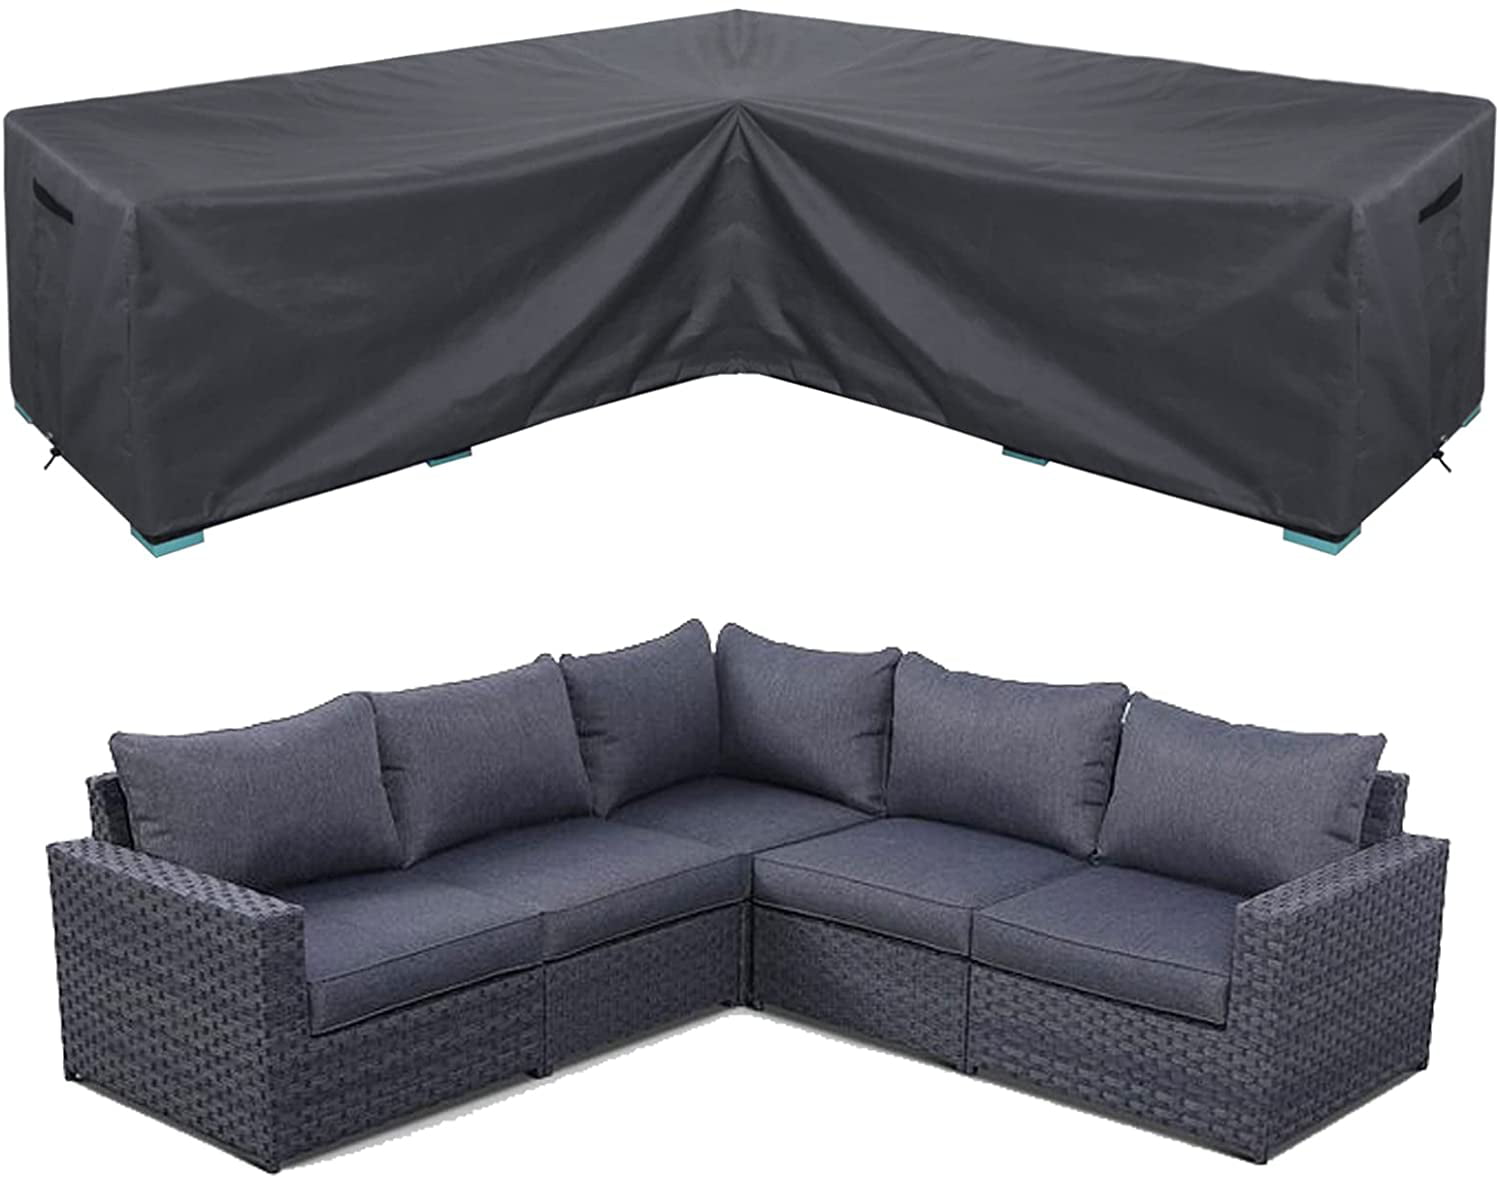 215x215x87cm V Shaped Oxford Polyester Garden Furniture Sectional Couch Covers Waterproof Anti-UV Patio Sofa Table Cover Patio Furniture Covers